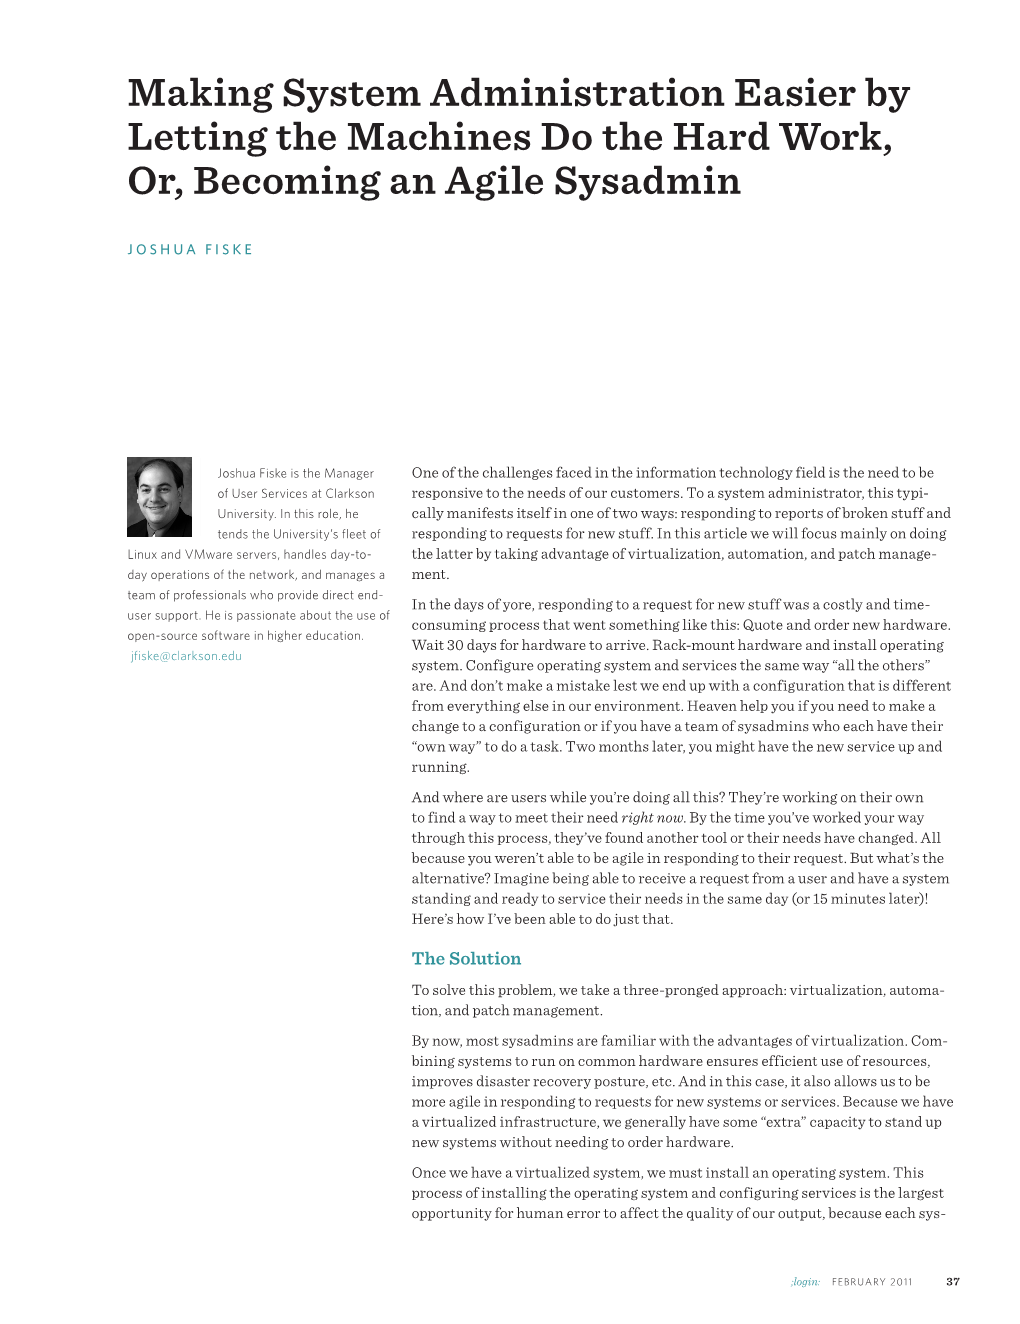 Making System Administration Easier by Letting the Machines Do the Hard Work, Or, Becoming an Agile Sysadmin